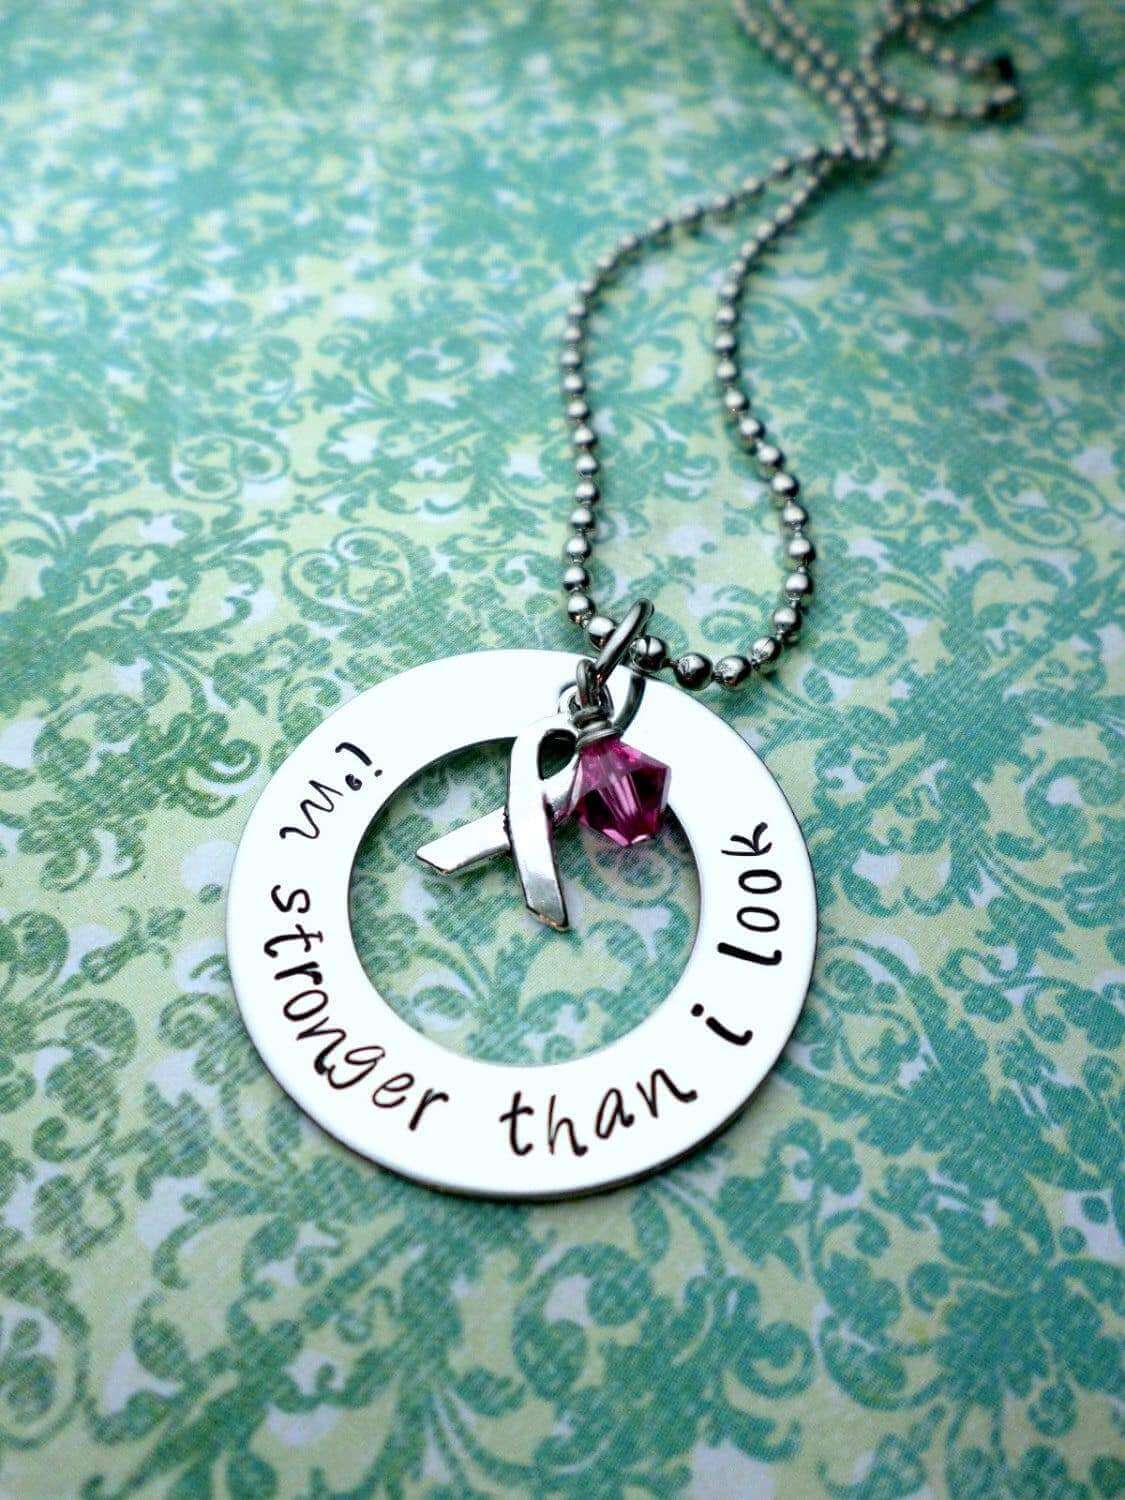 I'm Stronger Than I Look necklace, Breast Cancer Awareness, Chemo Gift, Fighting Cancer, Cancer, Necklaces, HandmadeLoveStories, HandmadeLoveStories , [Handmade_Love_Stories], [Hand_Stamped_Jewelry], [Etsy_Stamped_Jewelry], [Etsy_Jewelry]